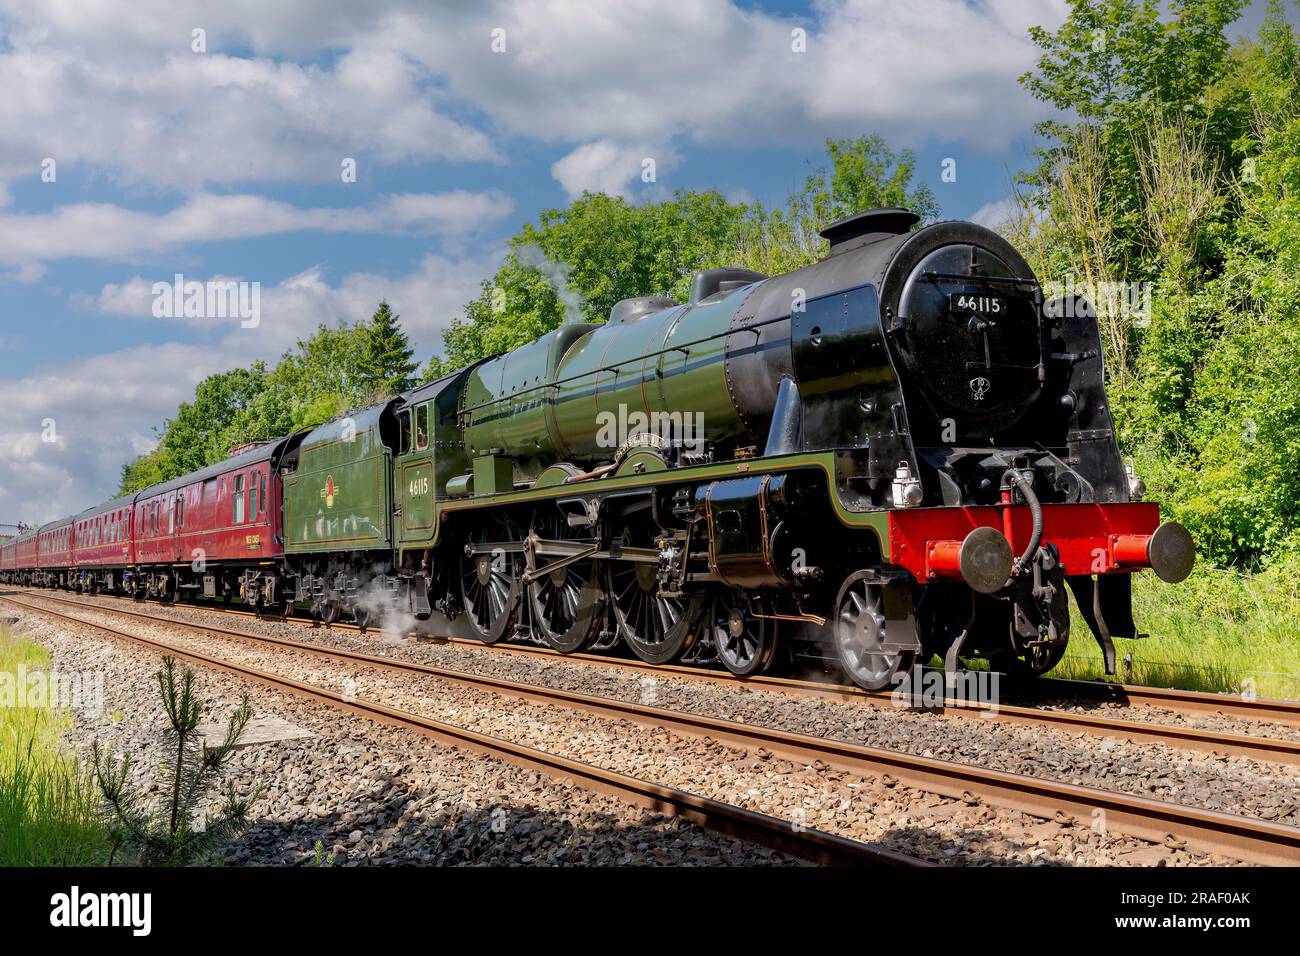 Heritage steam train LMS Royal Scot Class 6115 Scots Guardsman seen running on the main Carlisle to Settle track. Stock Photo